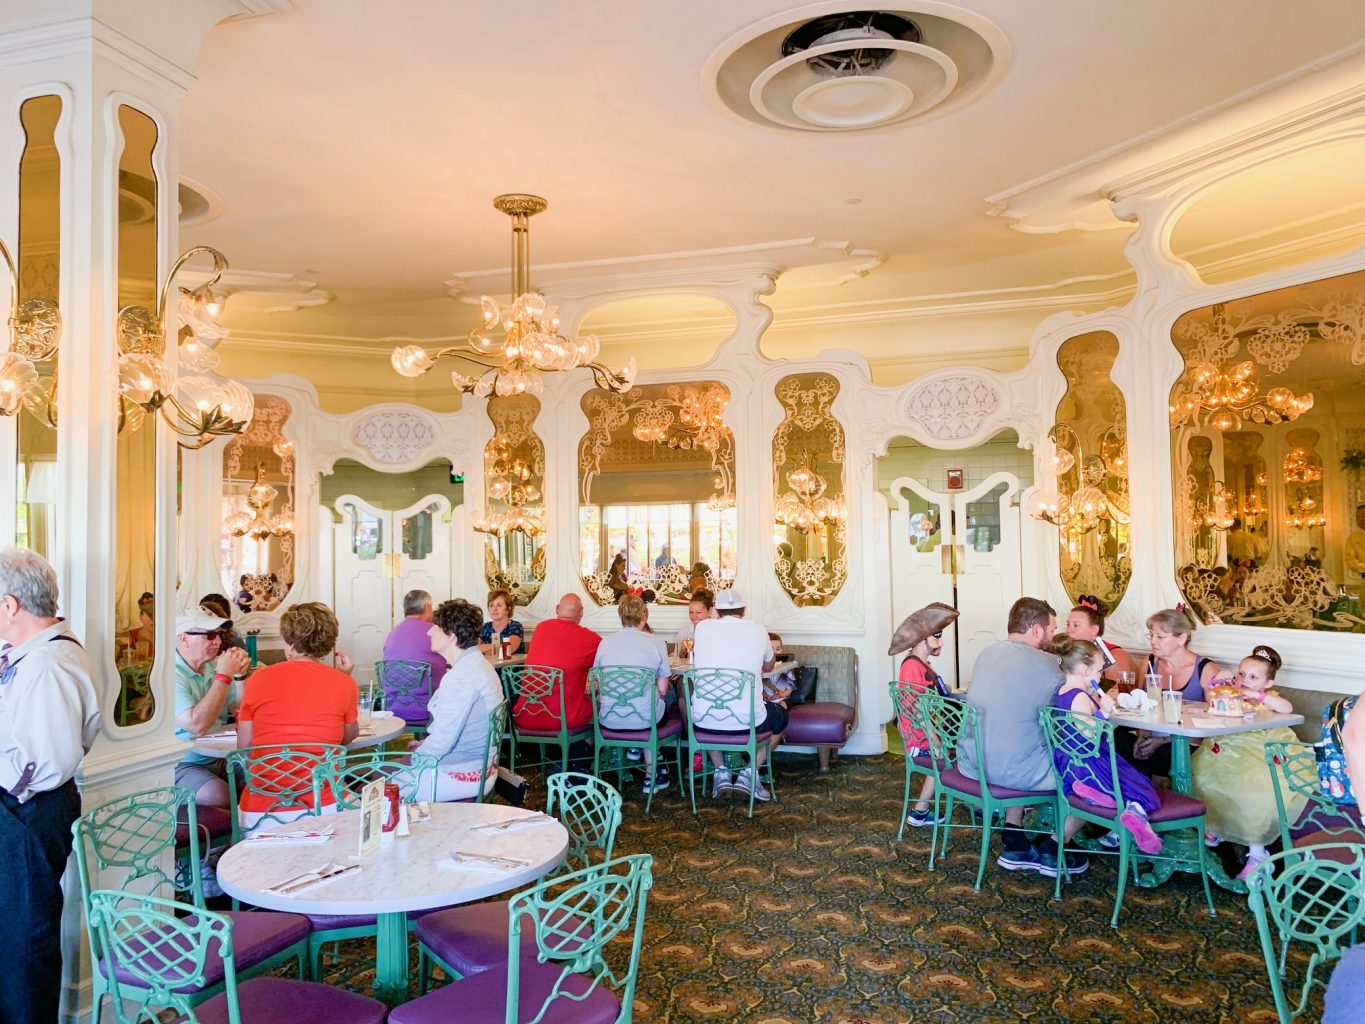 The antique white and gold interior with green chairs of the Plaza Restaurant show how dated this location is, which makes it not one of the best Magic Kingdom Restaurants.